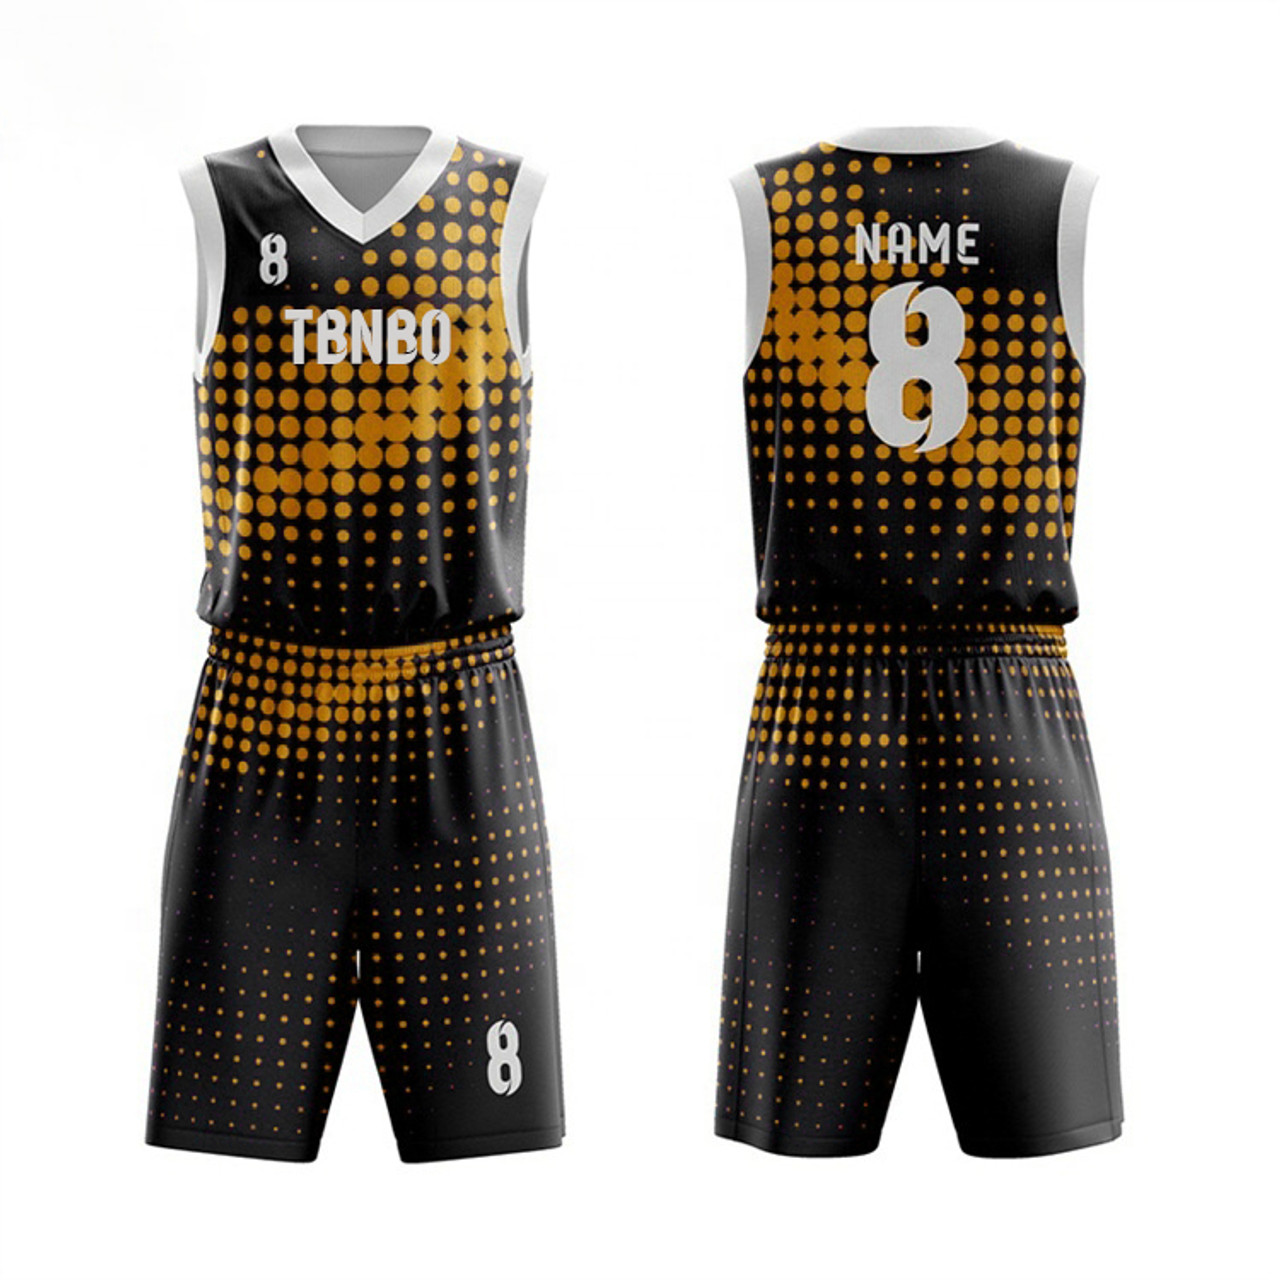 Interlock pin-dot shoulder basketball jersey with custom names and numbers